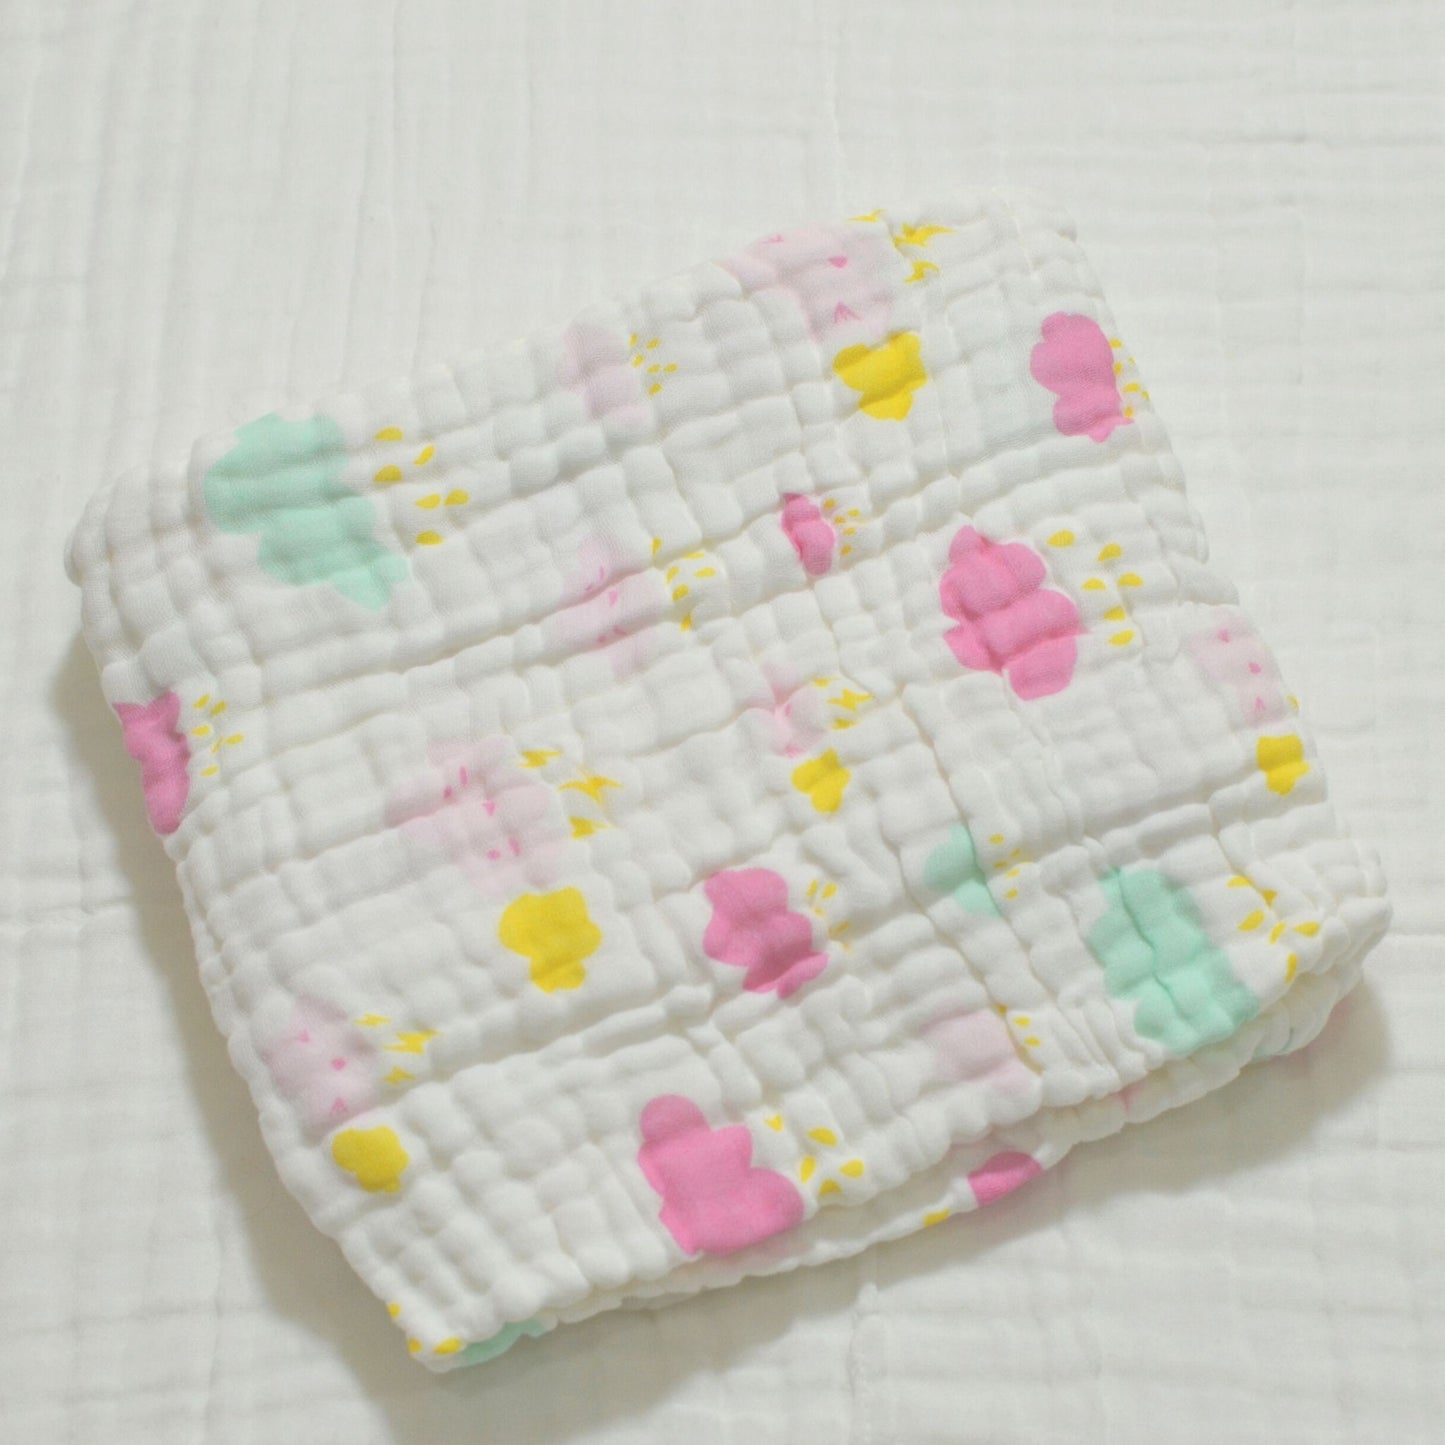 6 Layered Printed Cotton Gauze Baby Blanket/Towel 105x105cm - Collection V